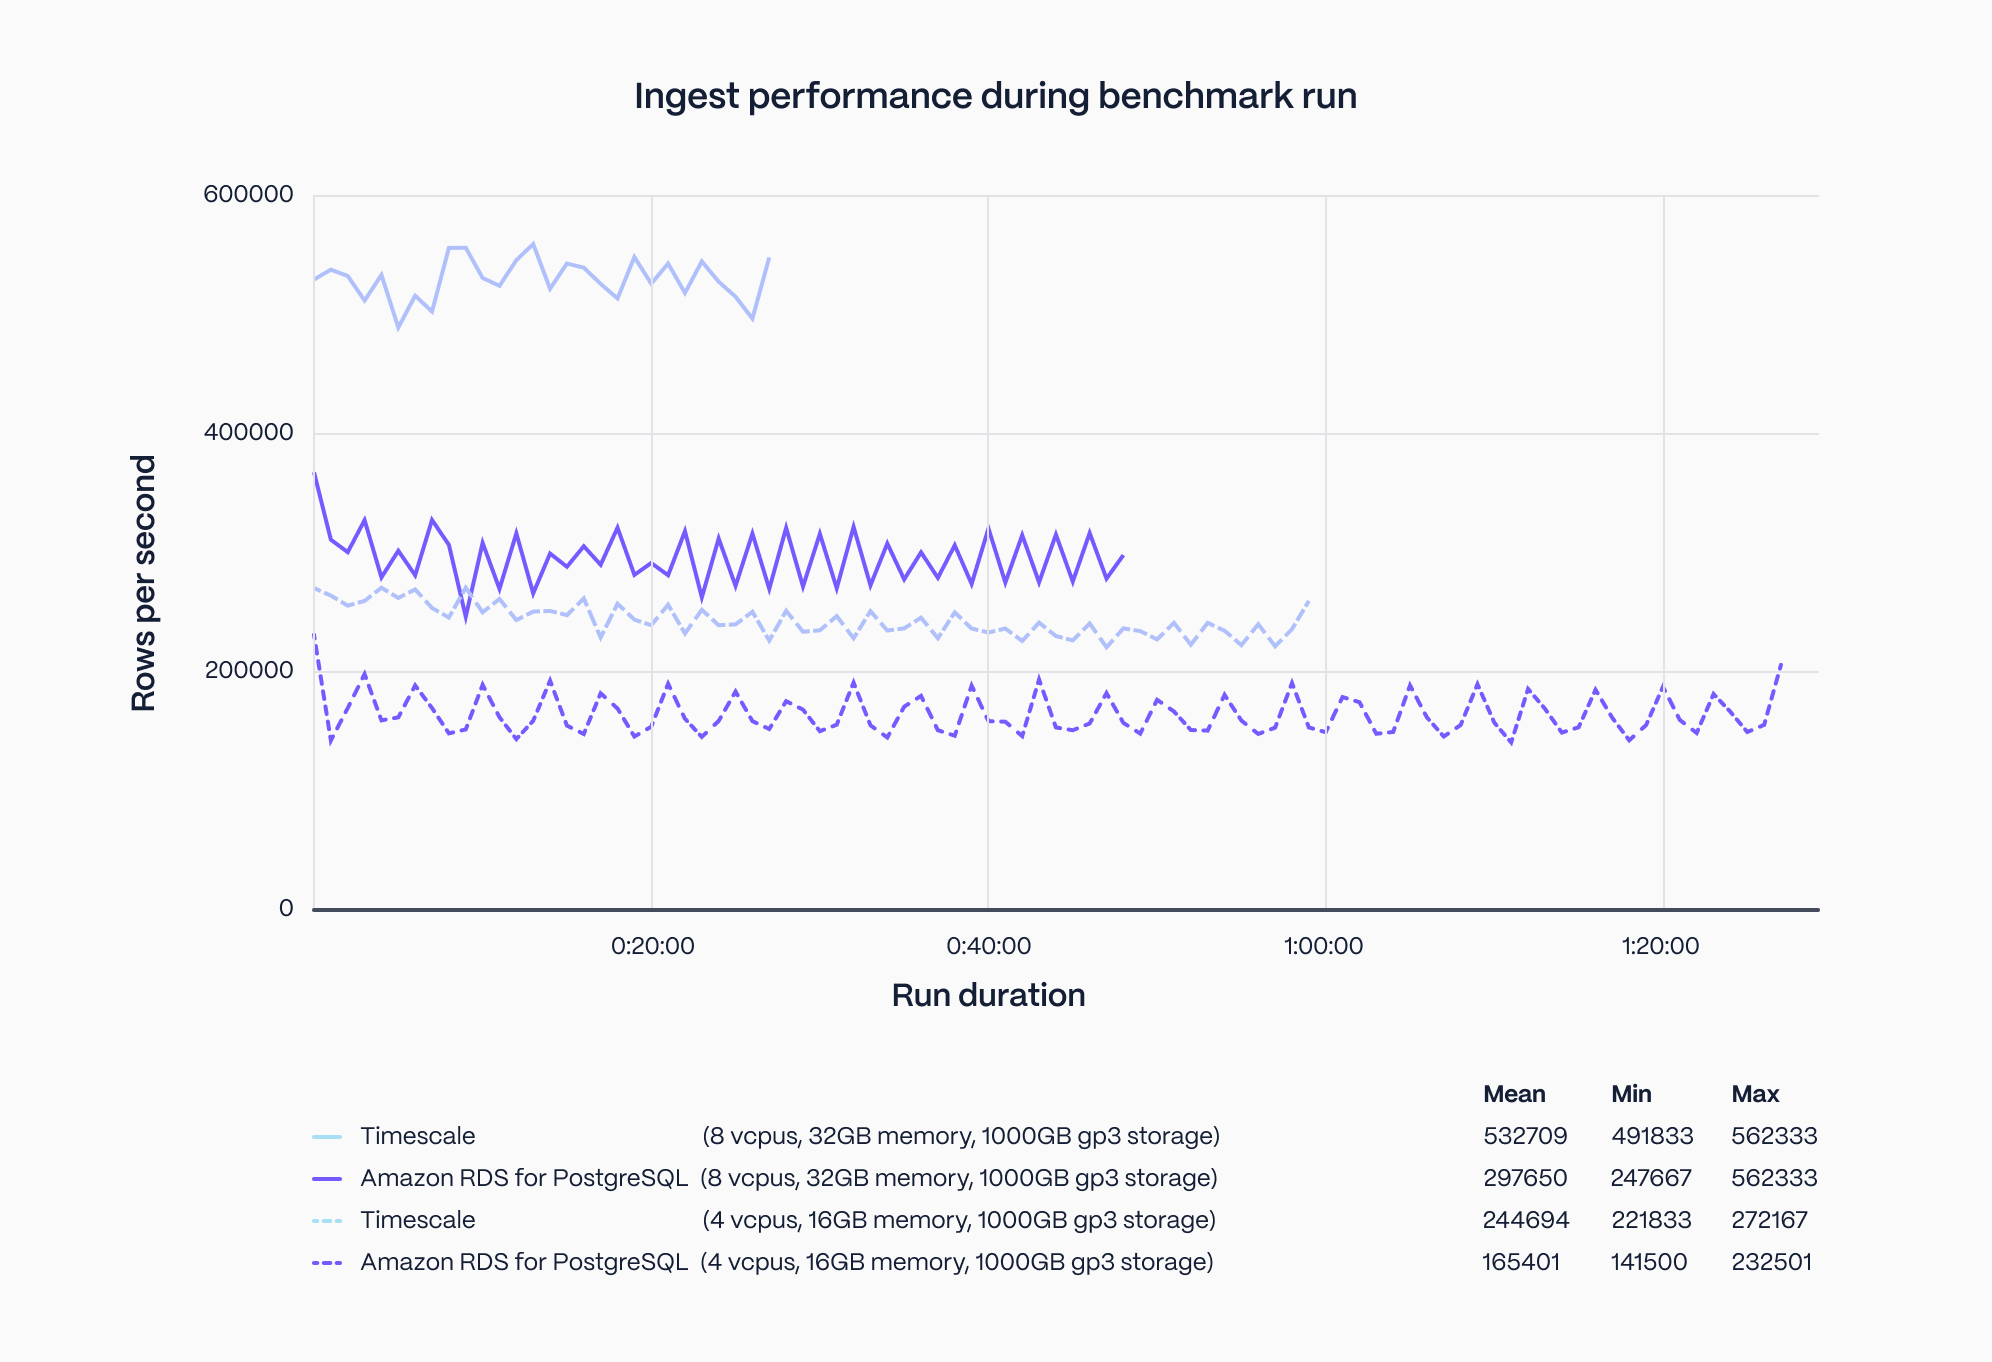 A diagram of our ingest performance during benchmark run between Timescale Cloud and RDS for time-series data